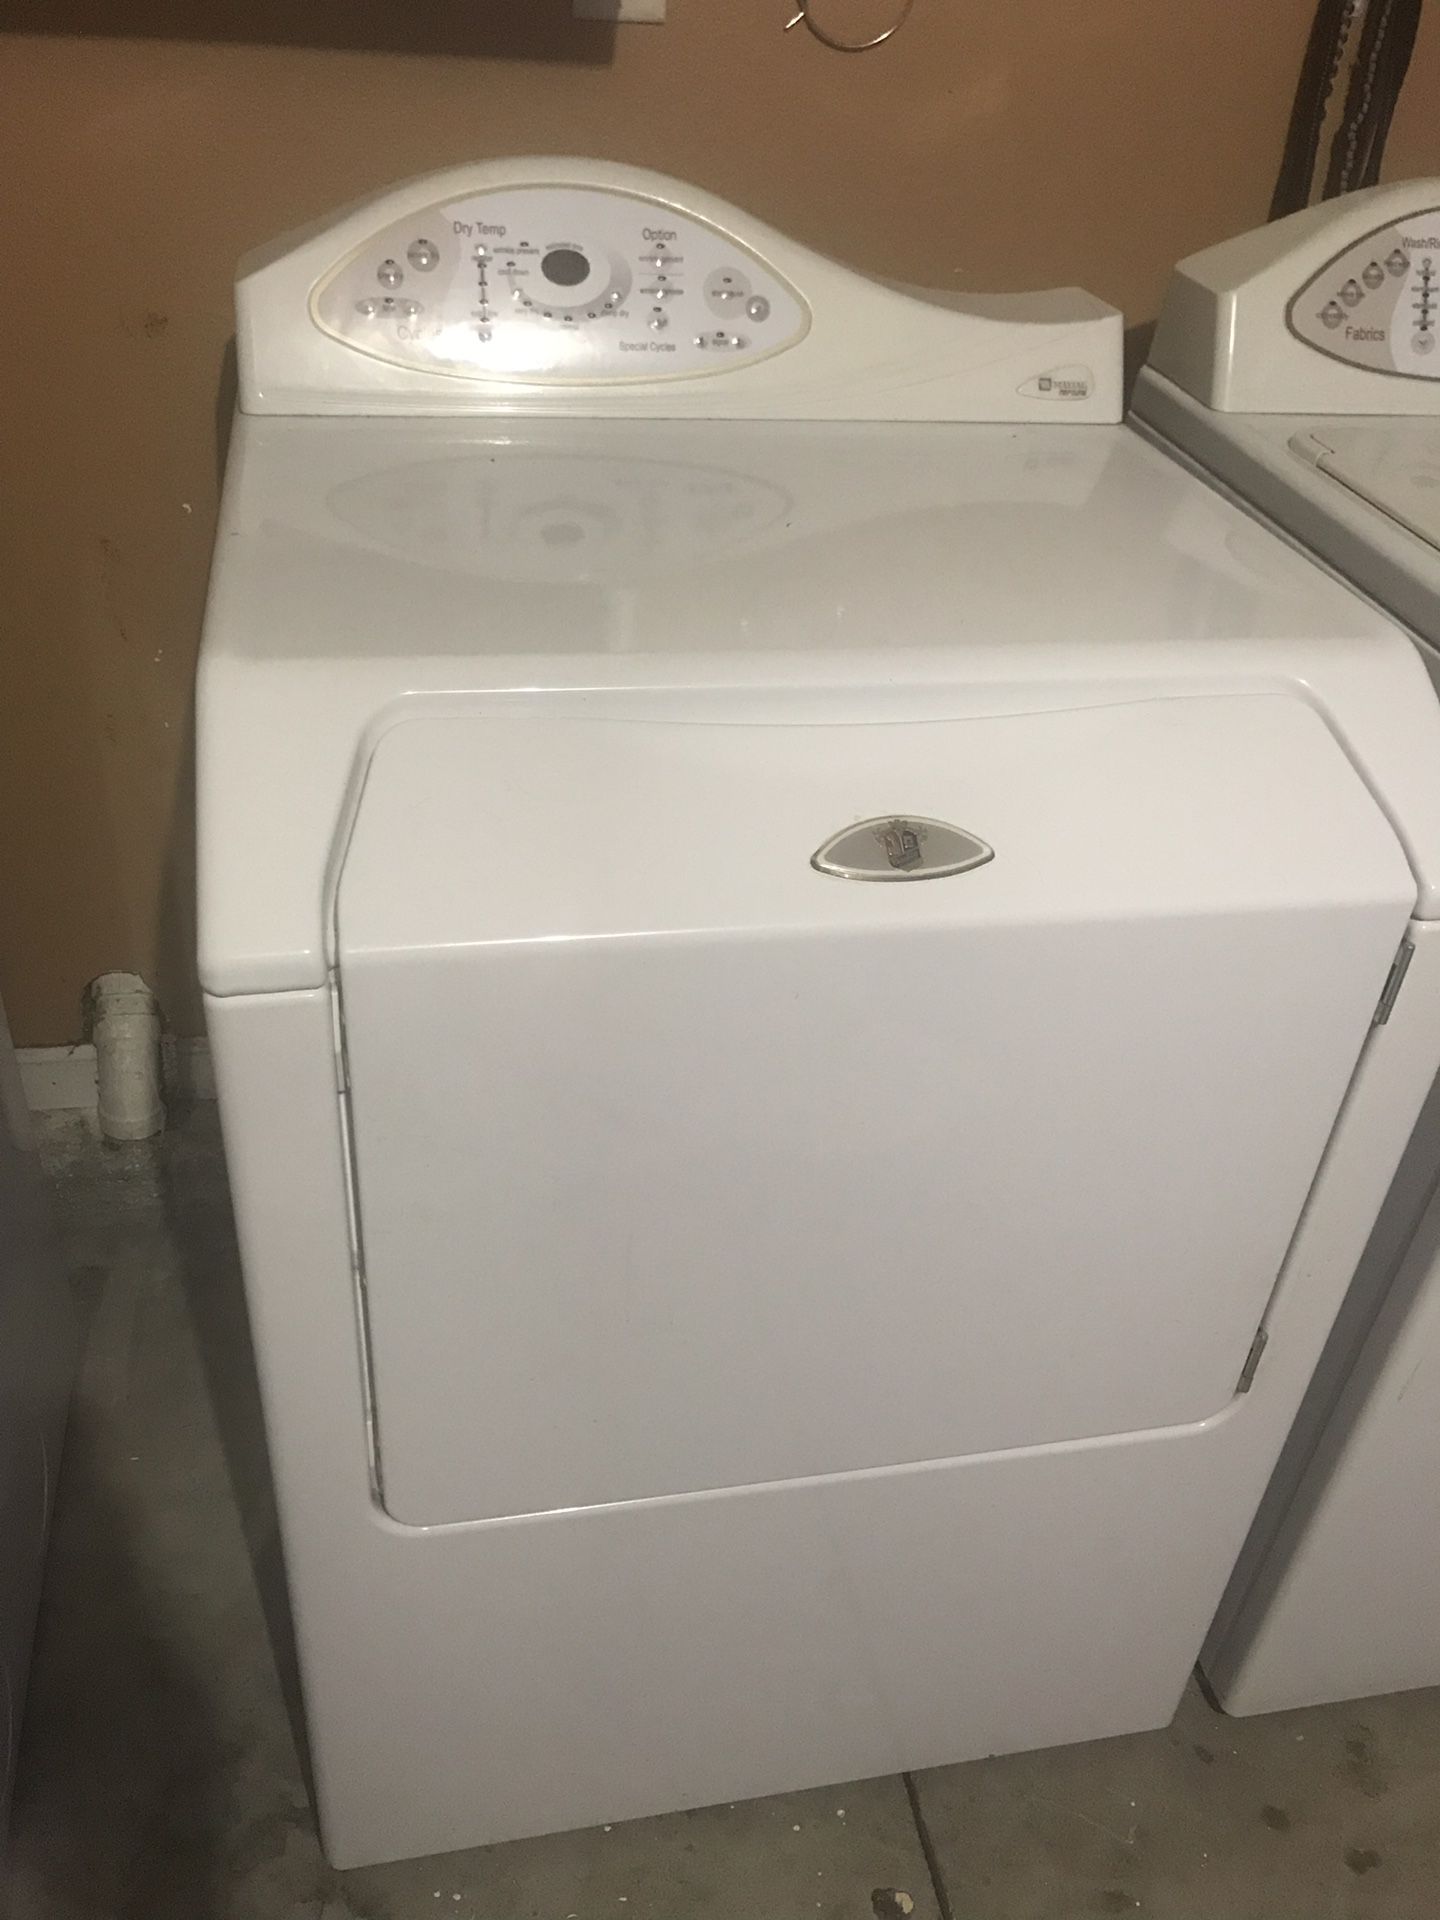 Maytag Neptune washer and dryer for Sale in Dade City, FL - OfferUp